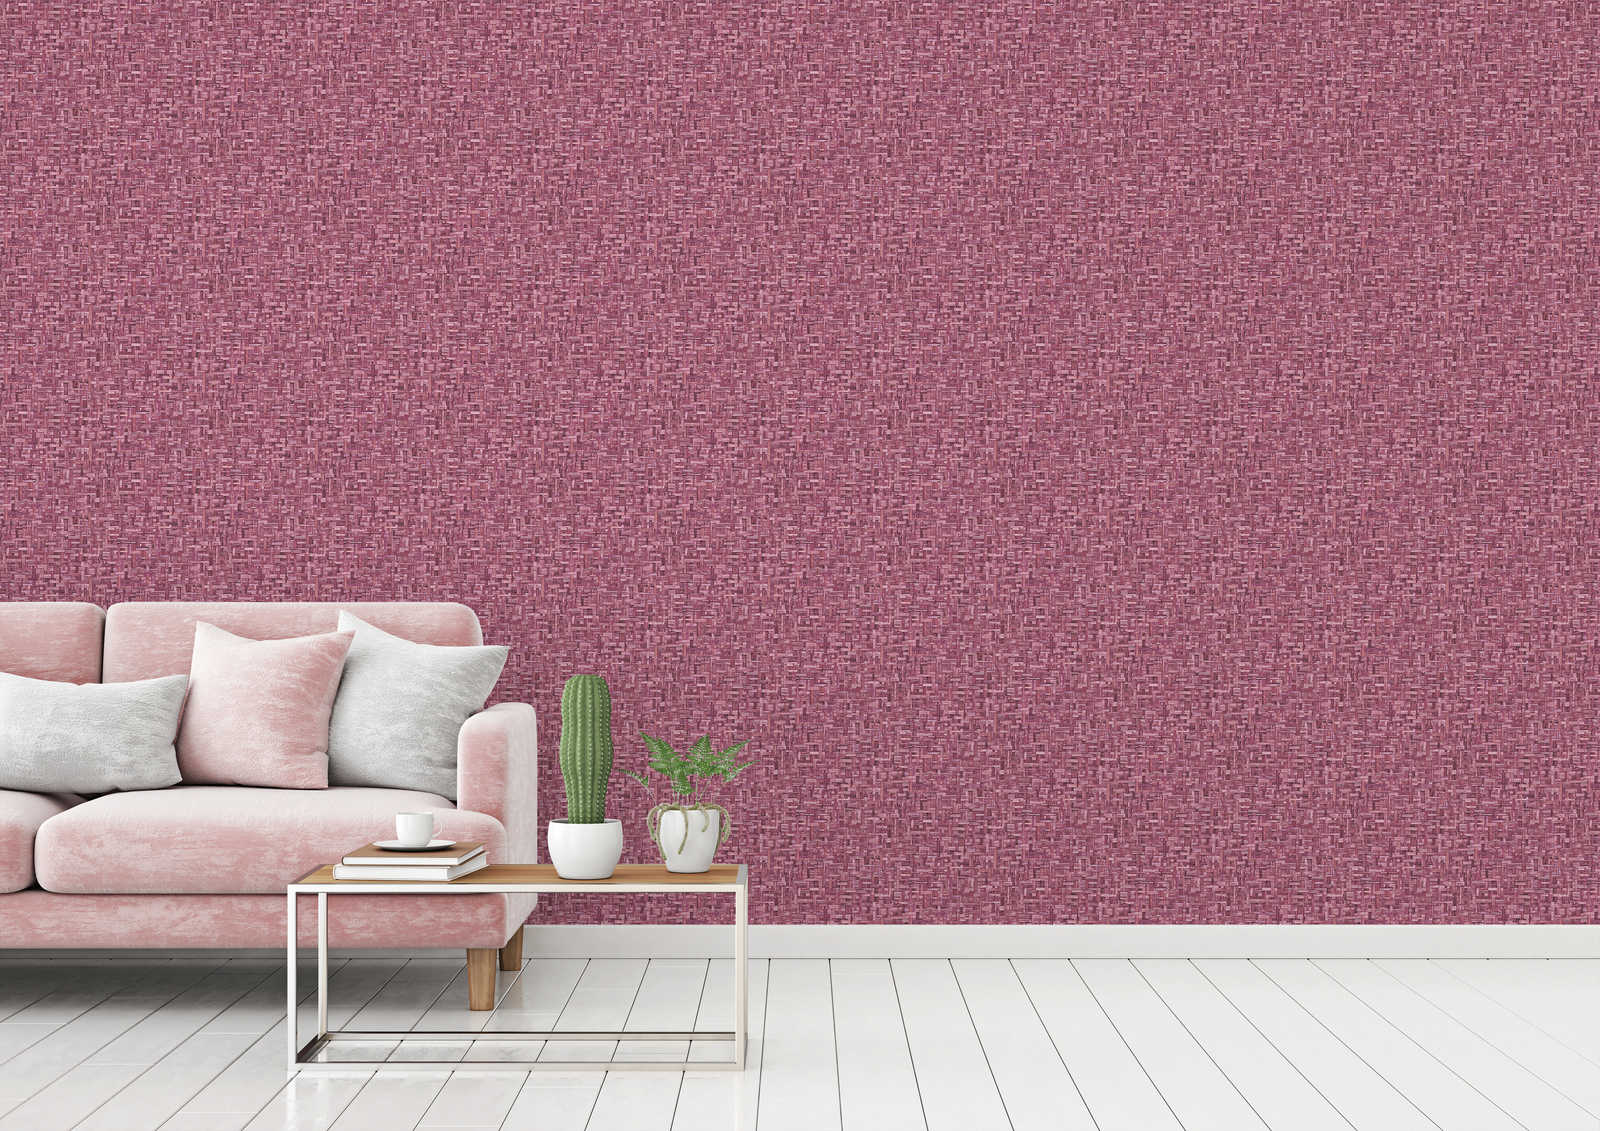             Non-woven wallpaper purple with braid pattern & texture design - pink, red
        